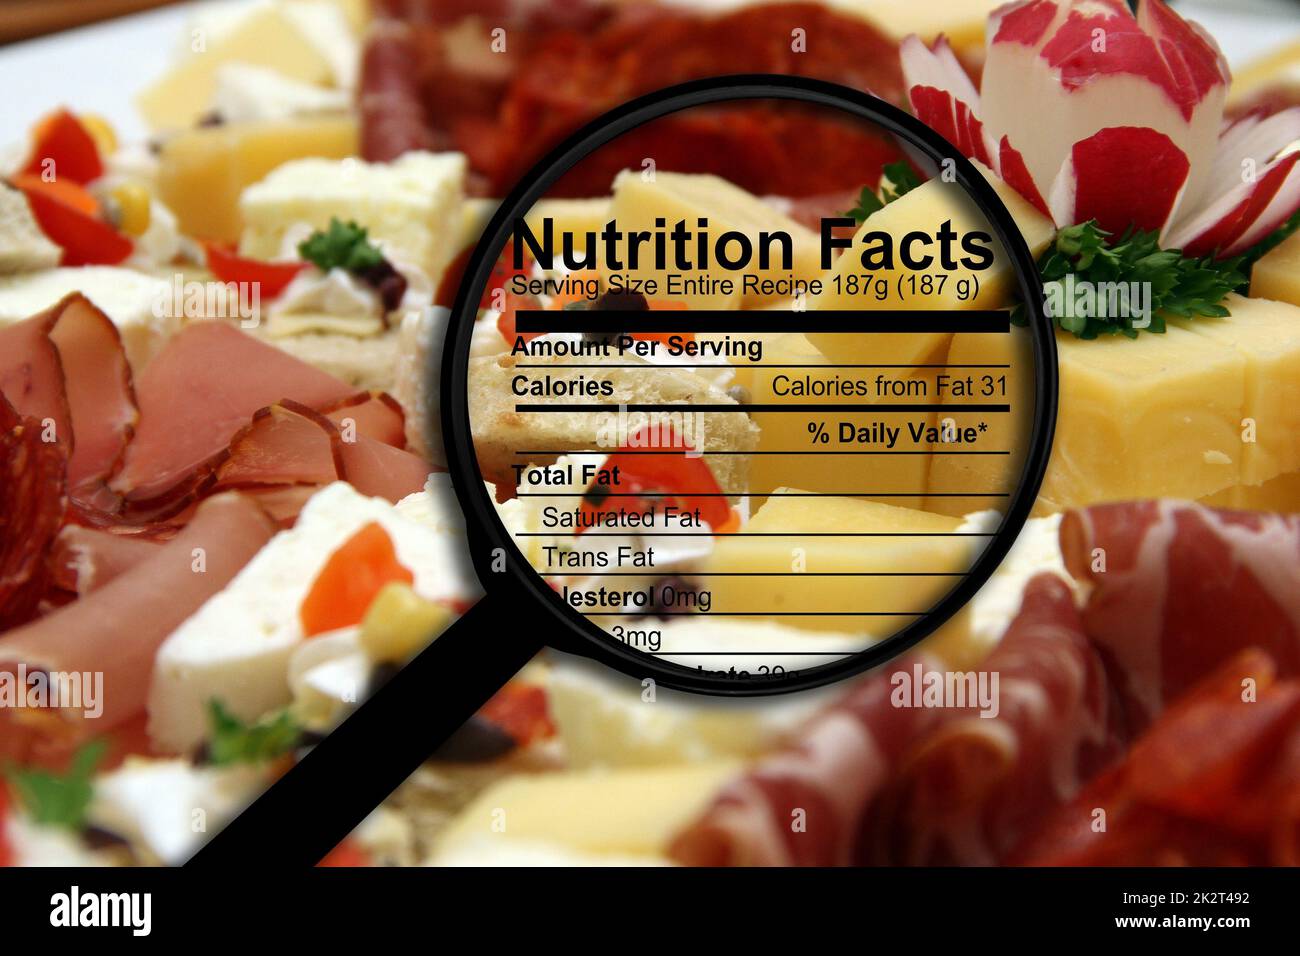 Nutrition facts on food Stock Photo